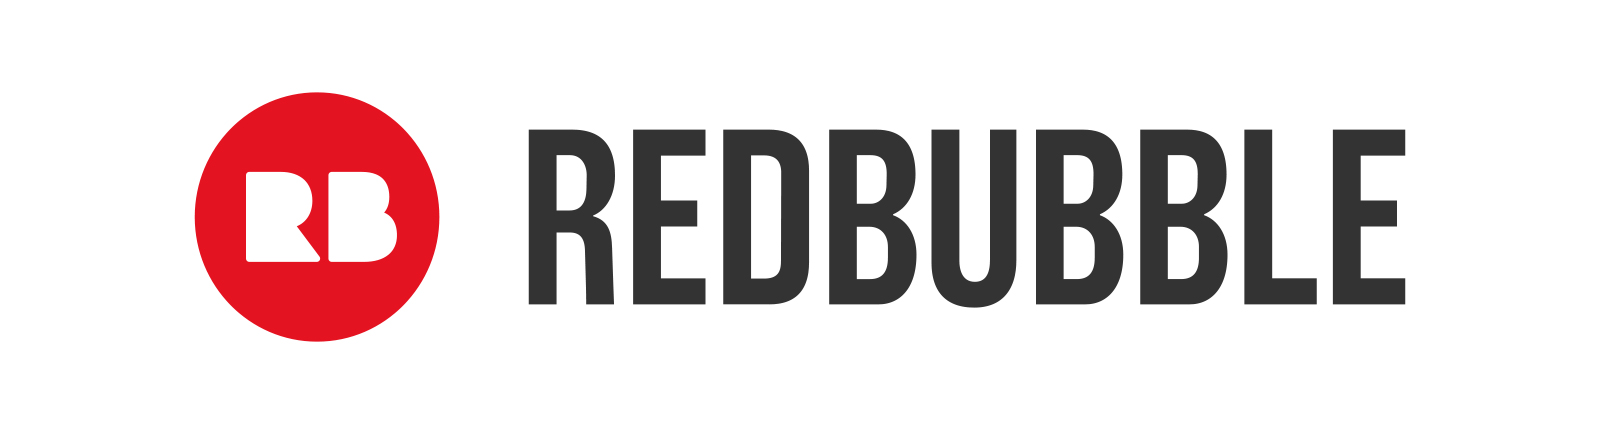 How to Upload Artwork to Redbubble Easily